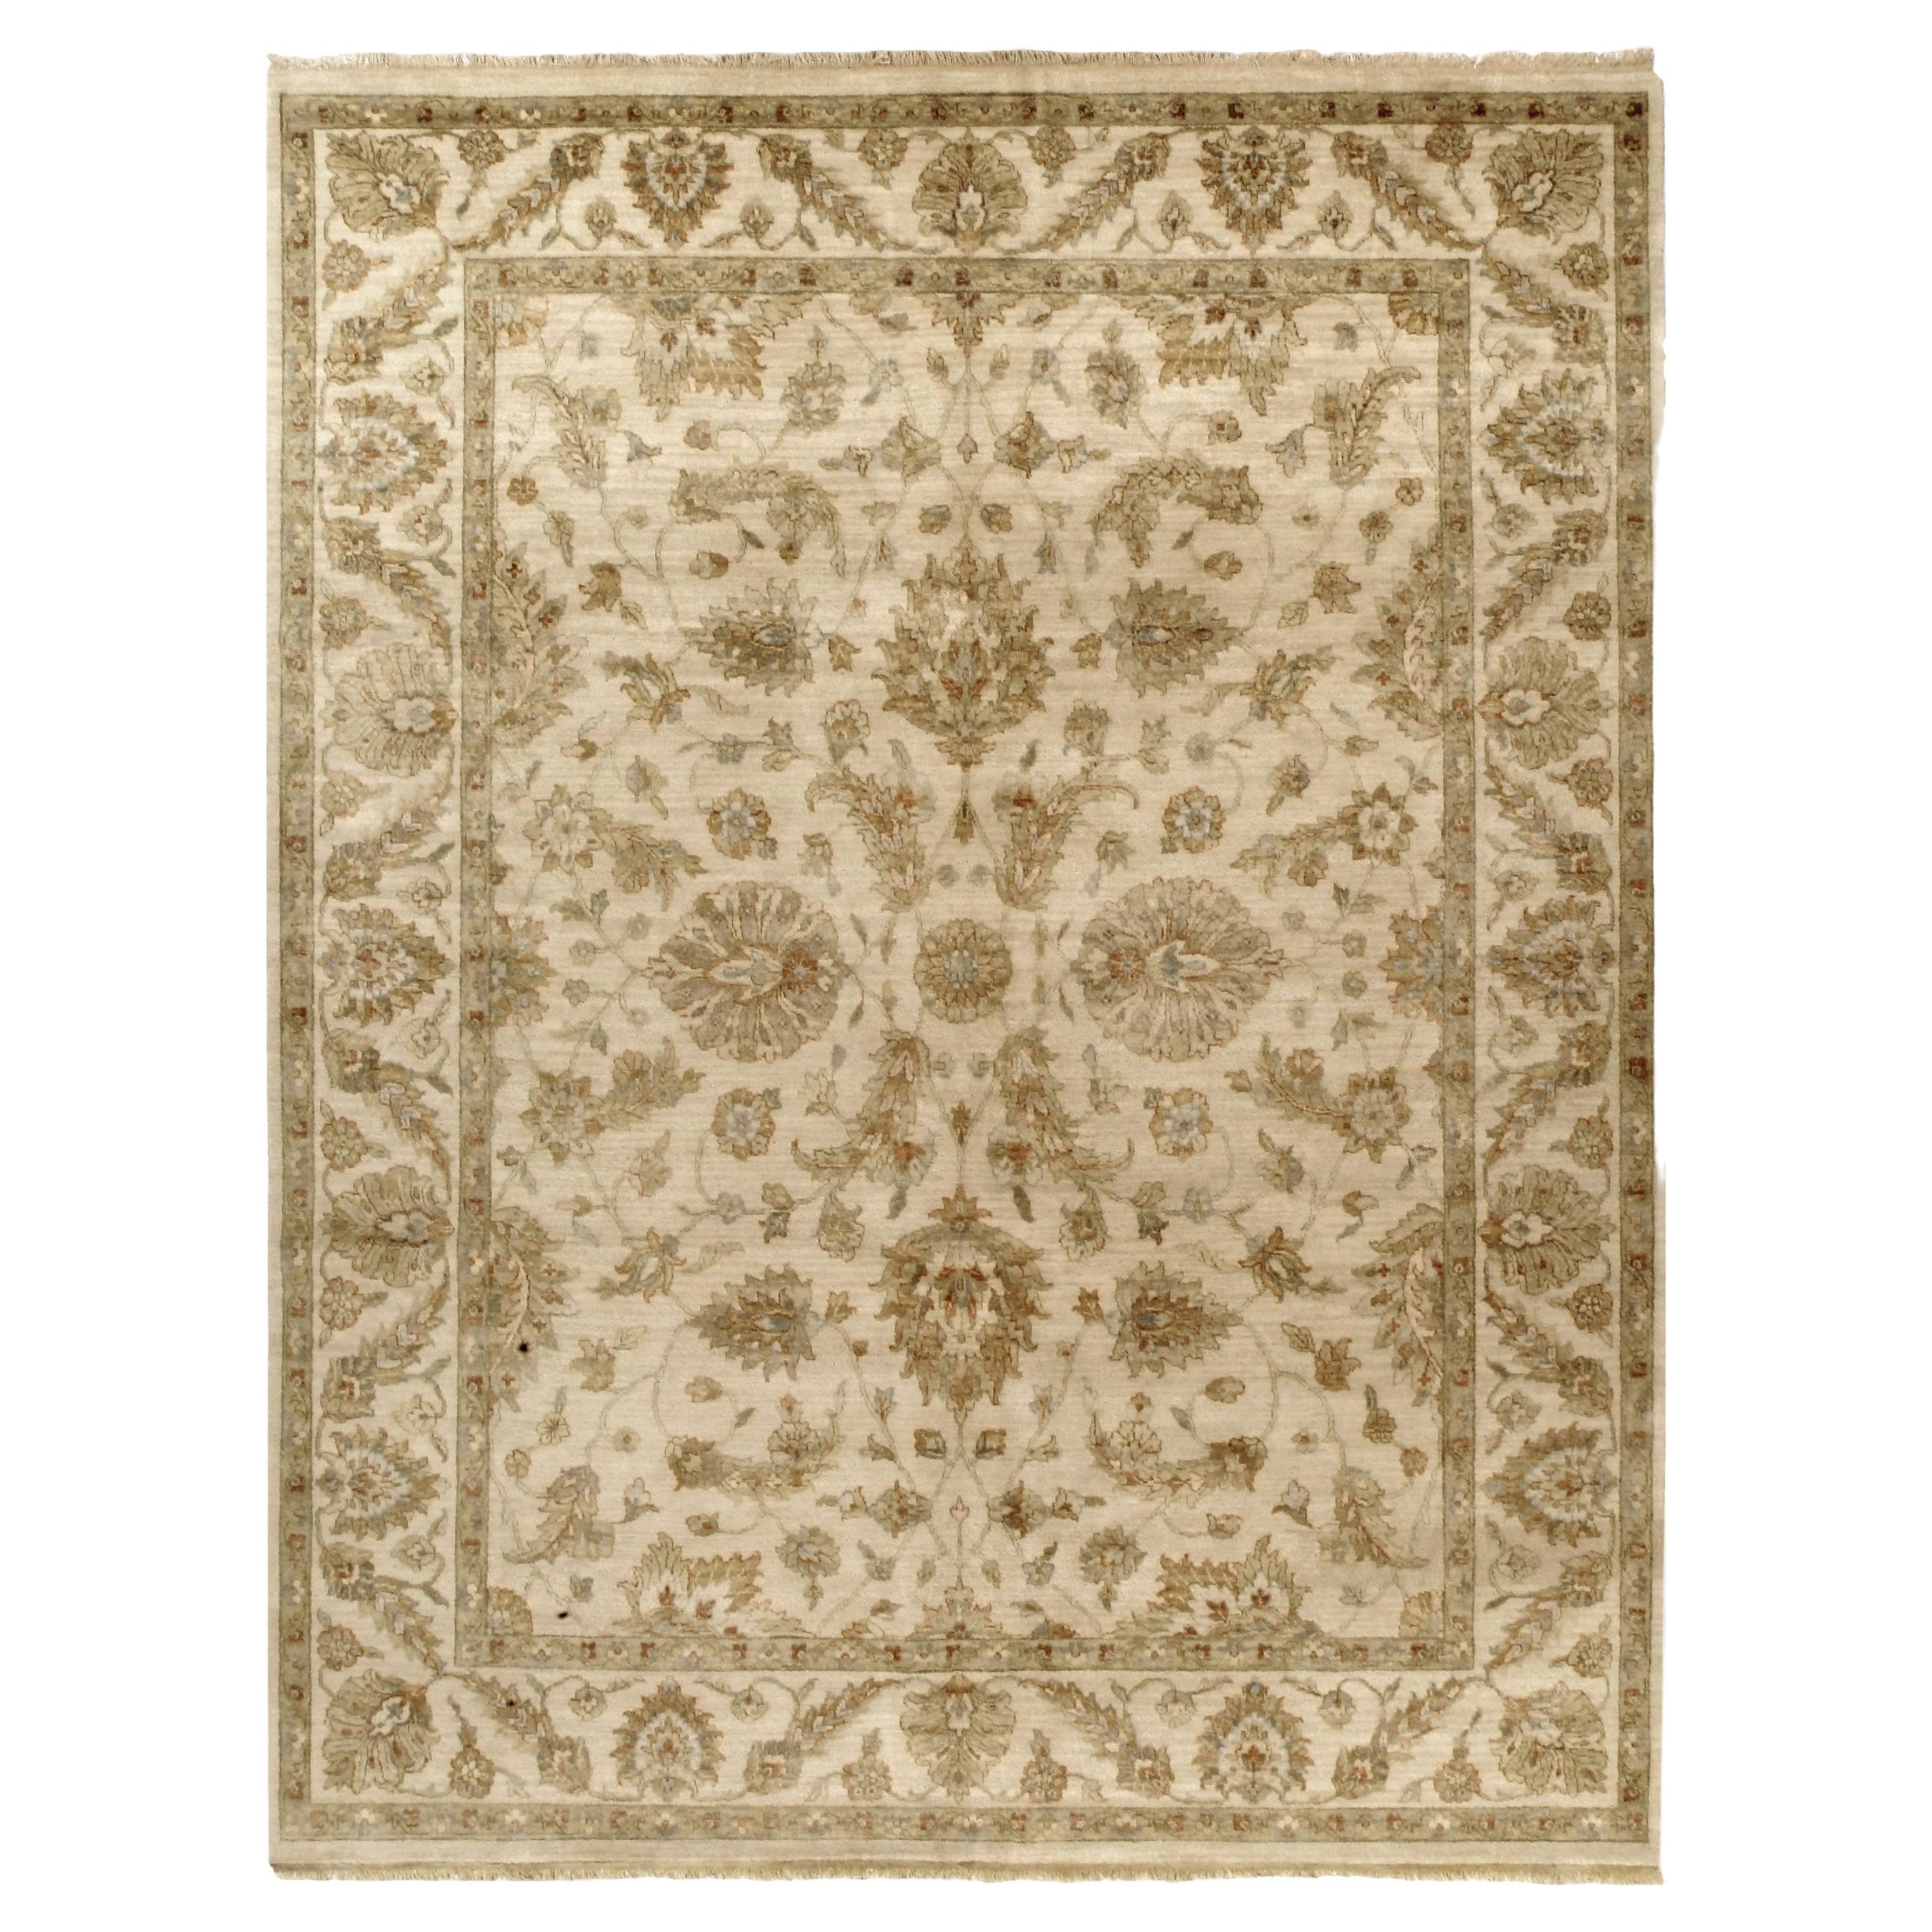 Luxury Traditional Hand-Knotted Cream 14x28 Rug